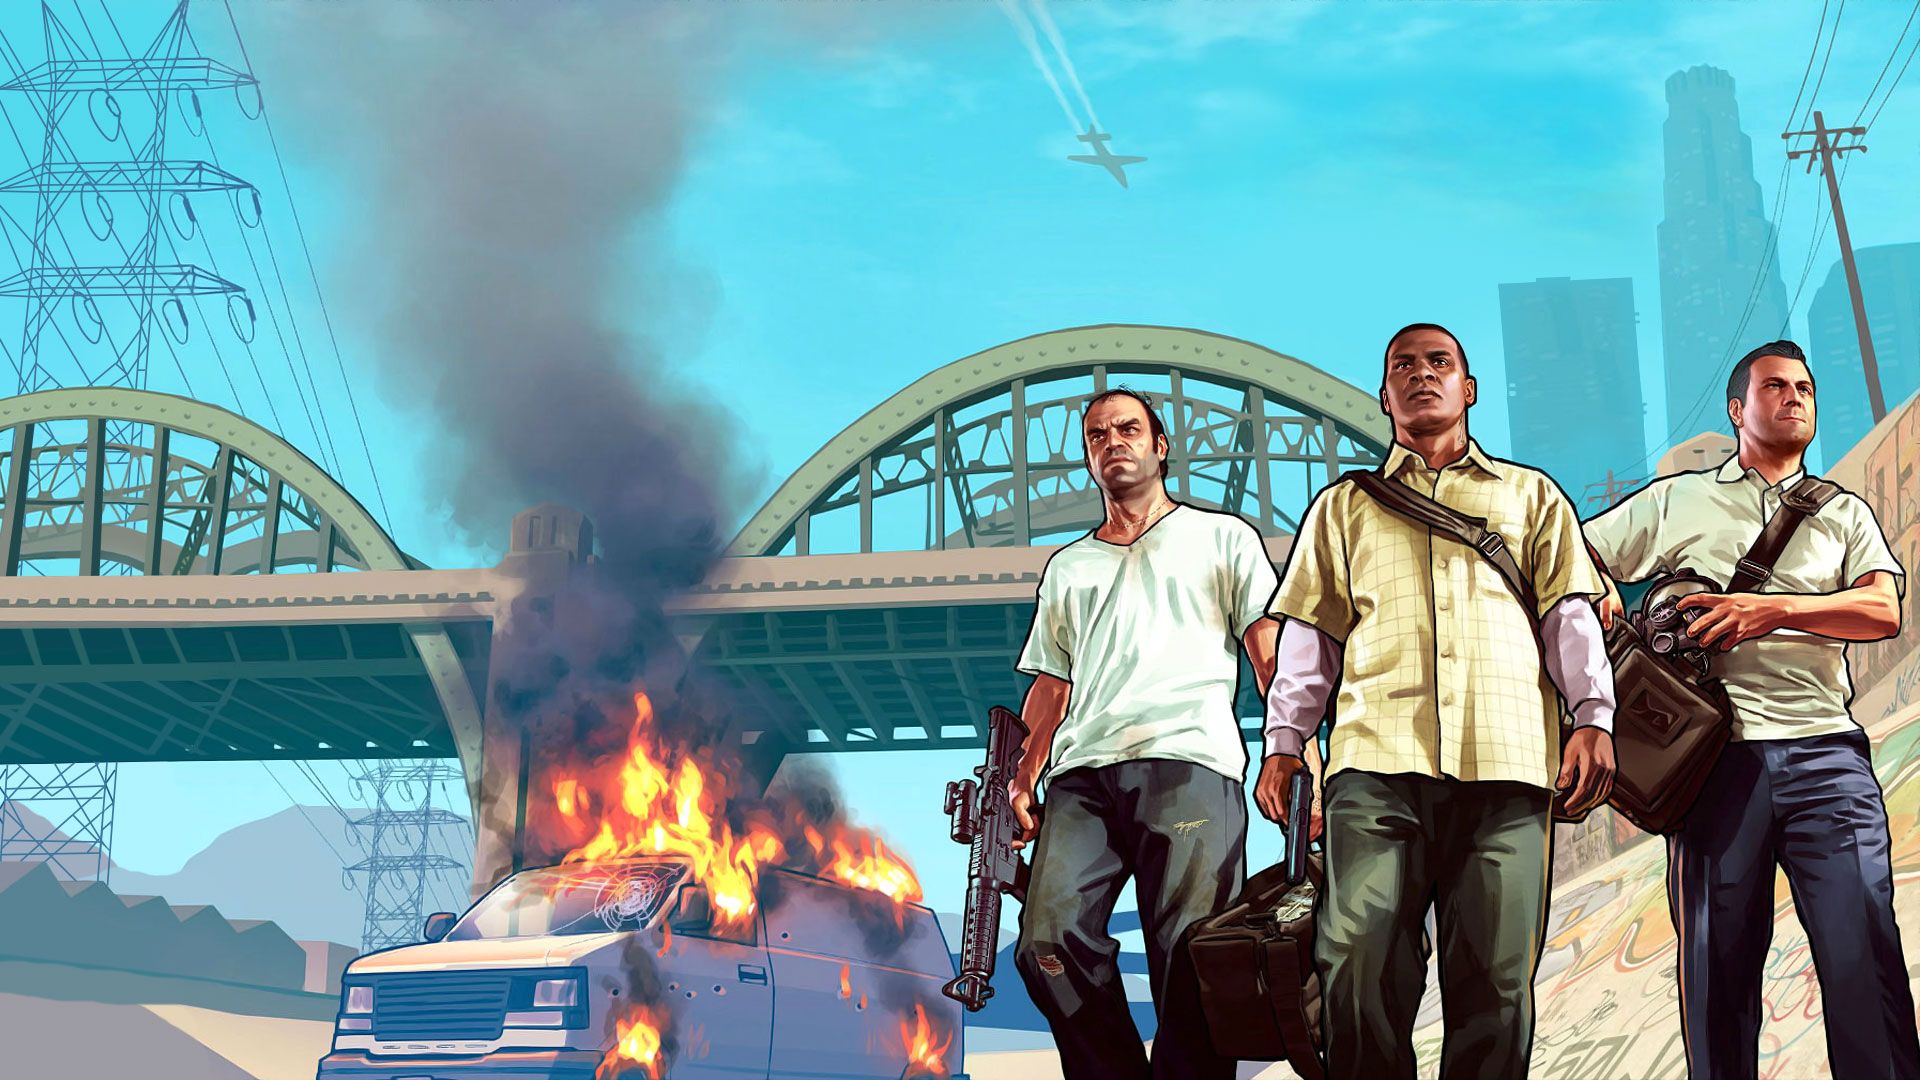 Grand Theft Auto 5 Wallpapers High Quality Download Free